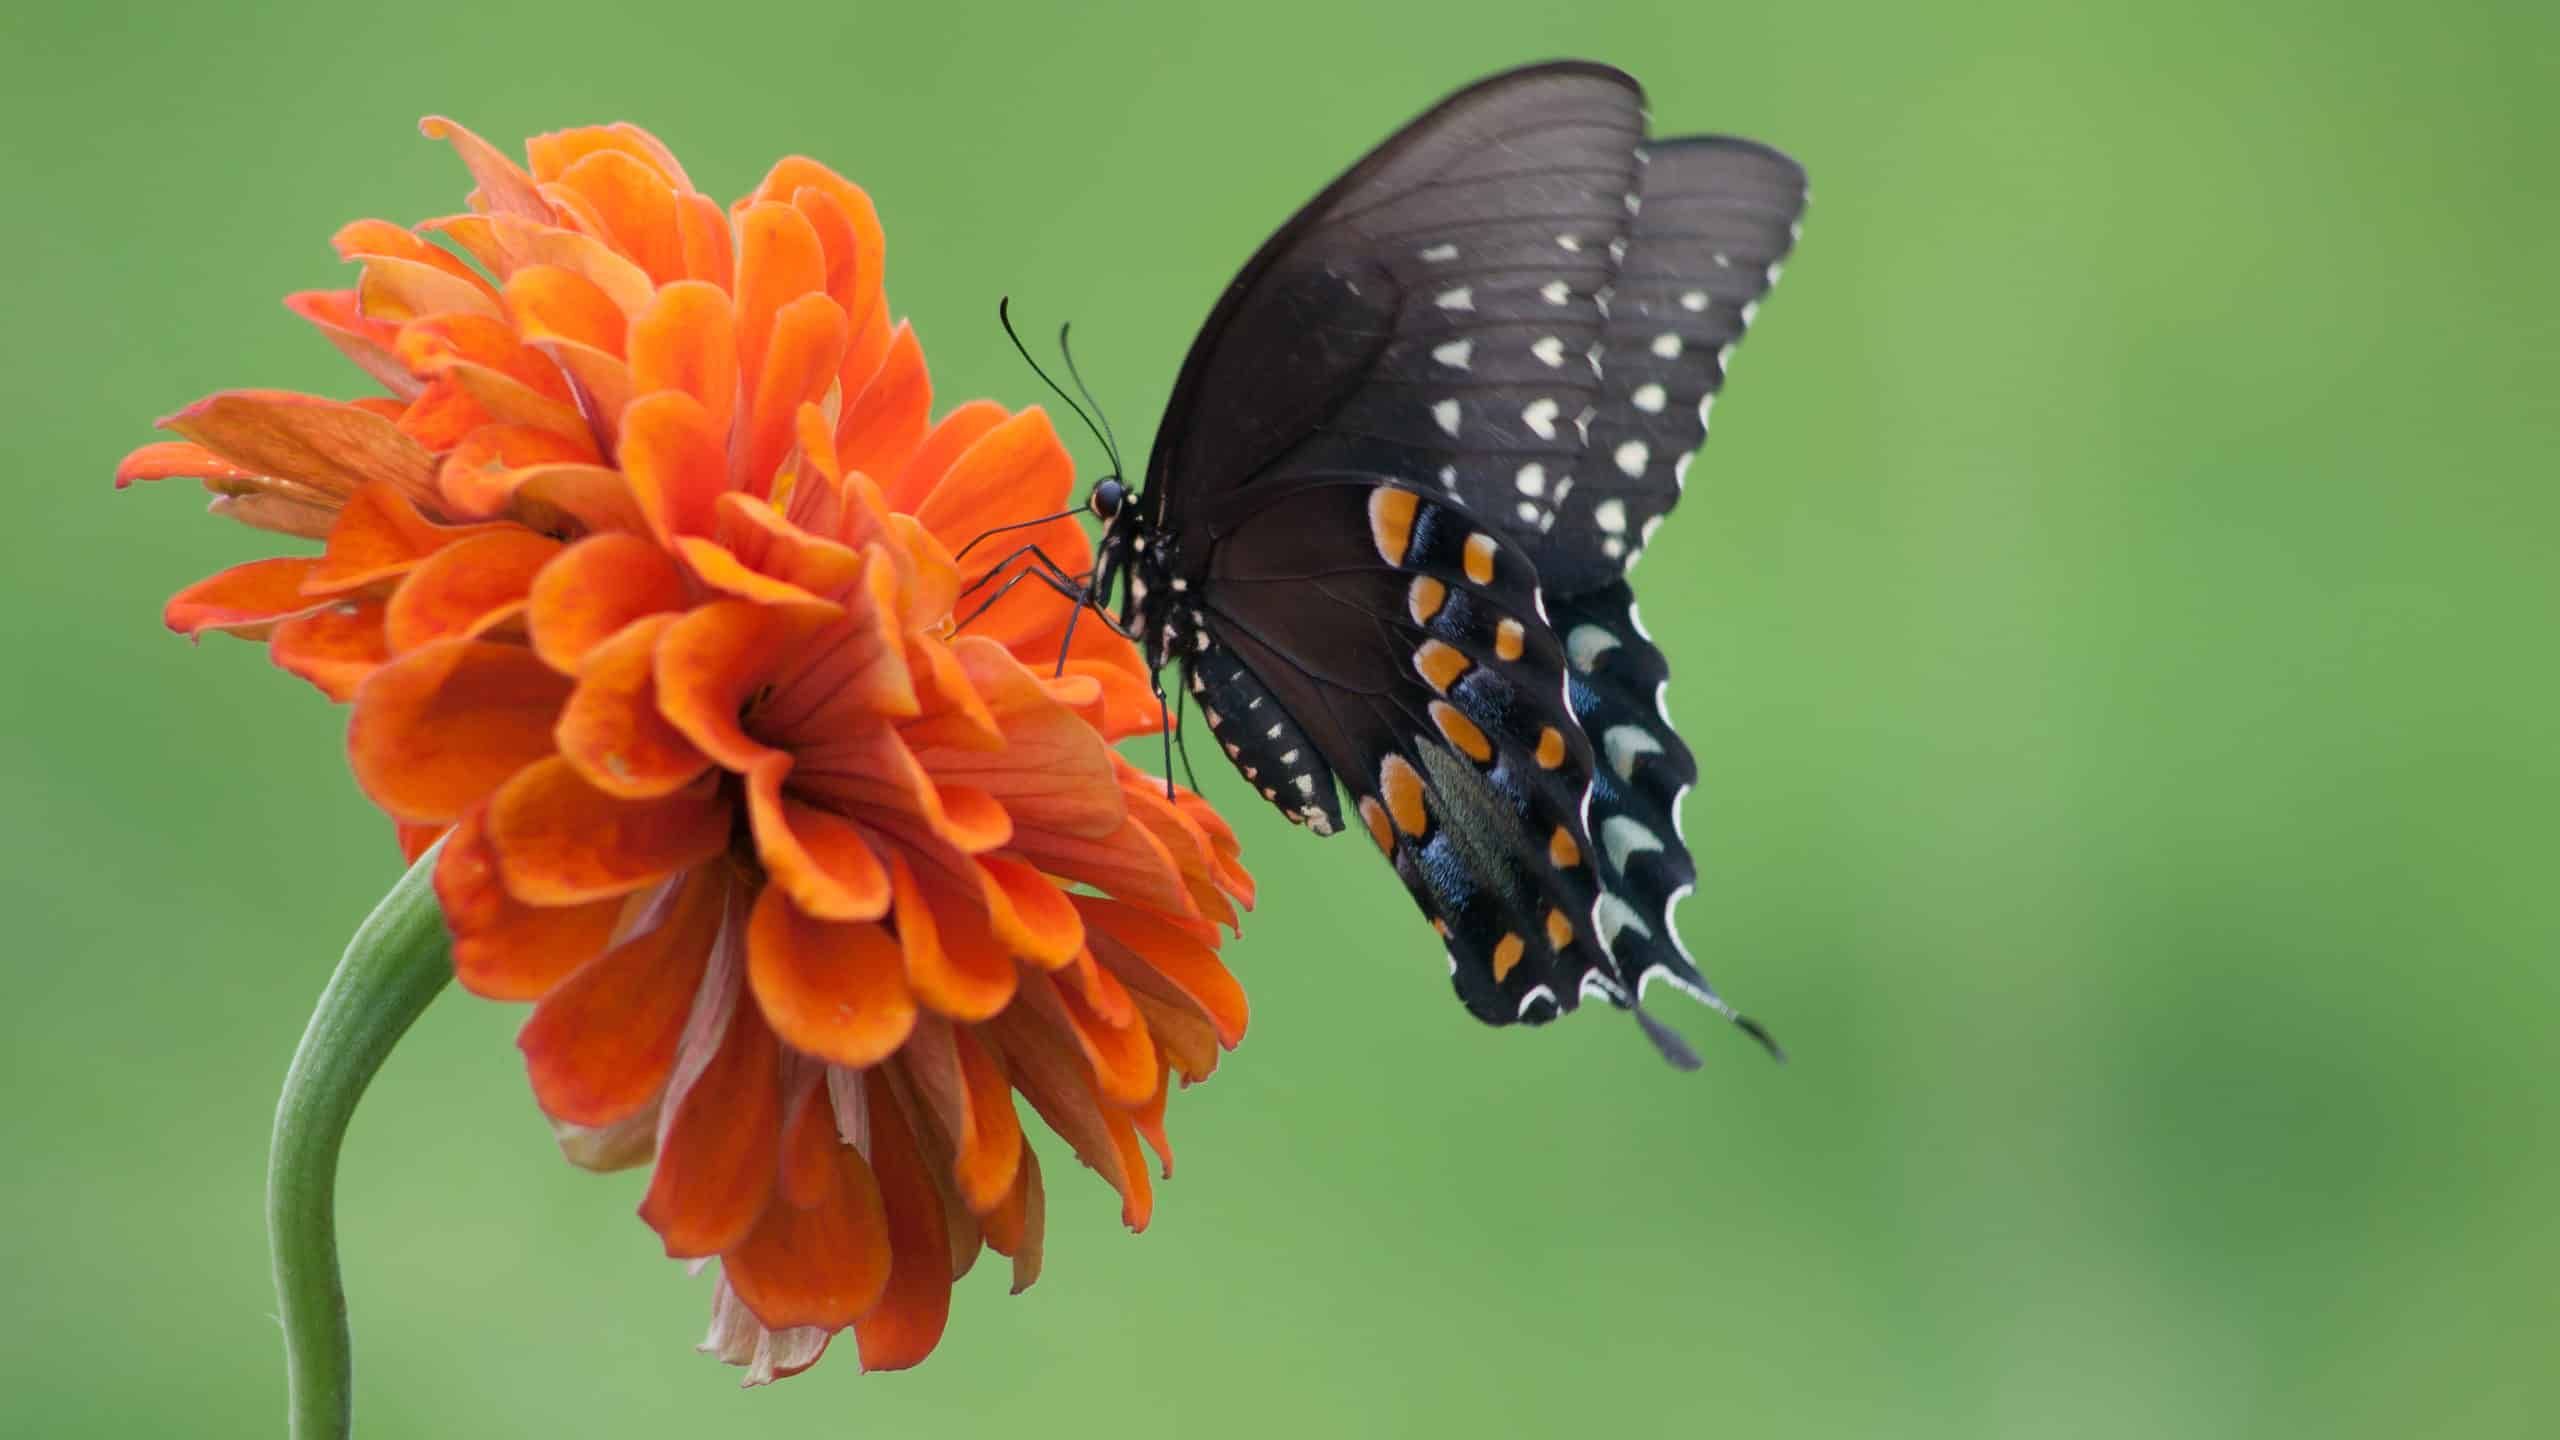 A black swallowtail butterfly is visible center frame facing left. The butterfly is feeding on an orange Xenia which is in the left part of the frame. The butterfly is primarily black with splotches of orange blue and white on its tail and the edges of its wings. The background is out of focus green.